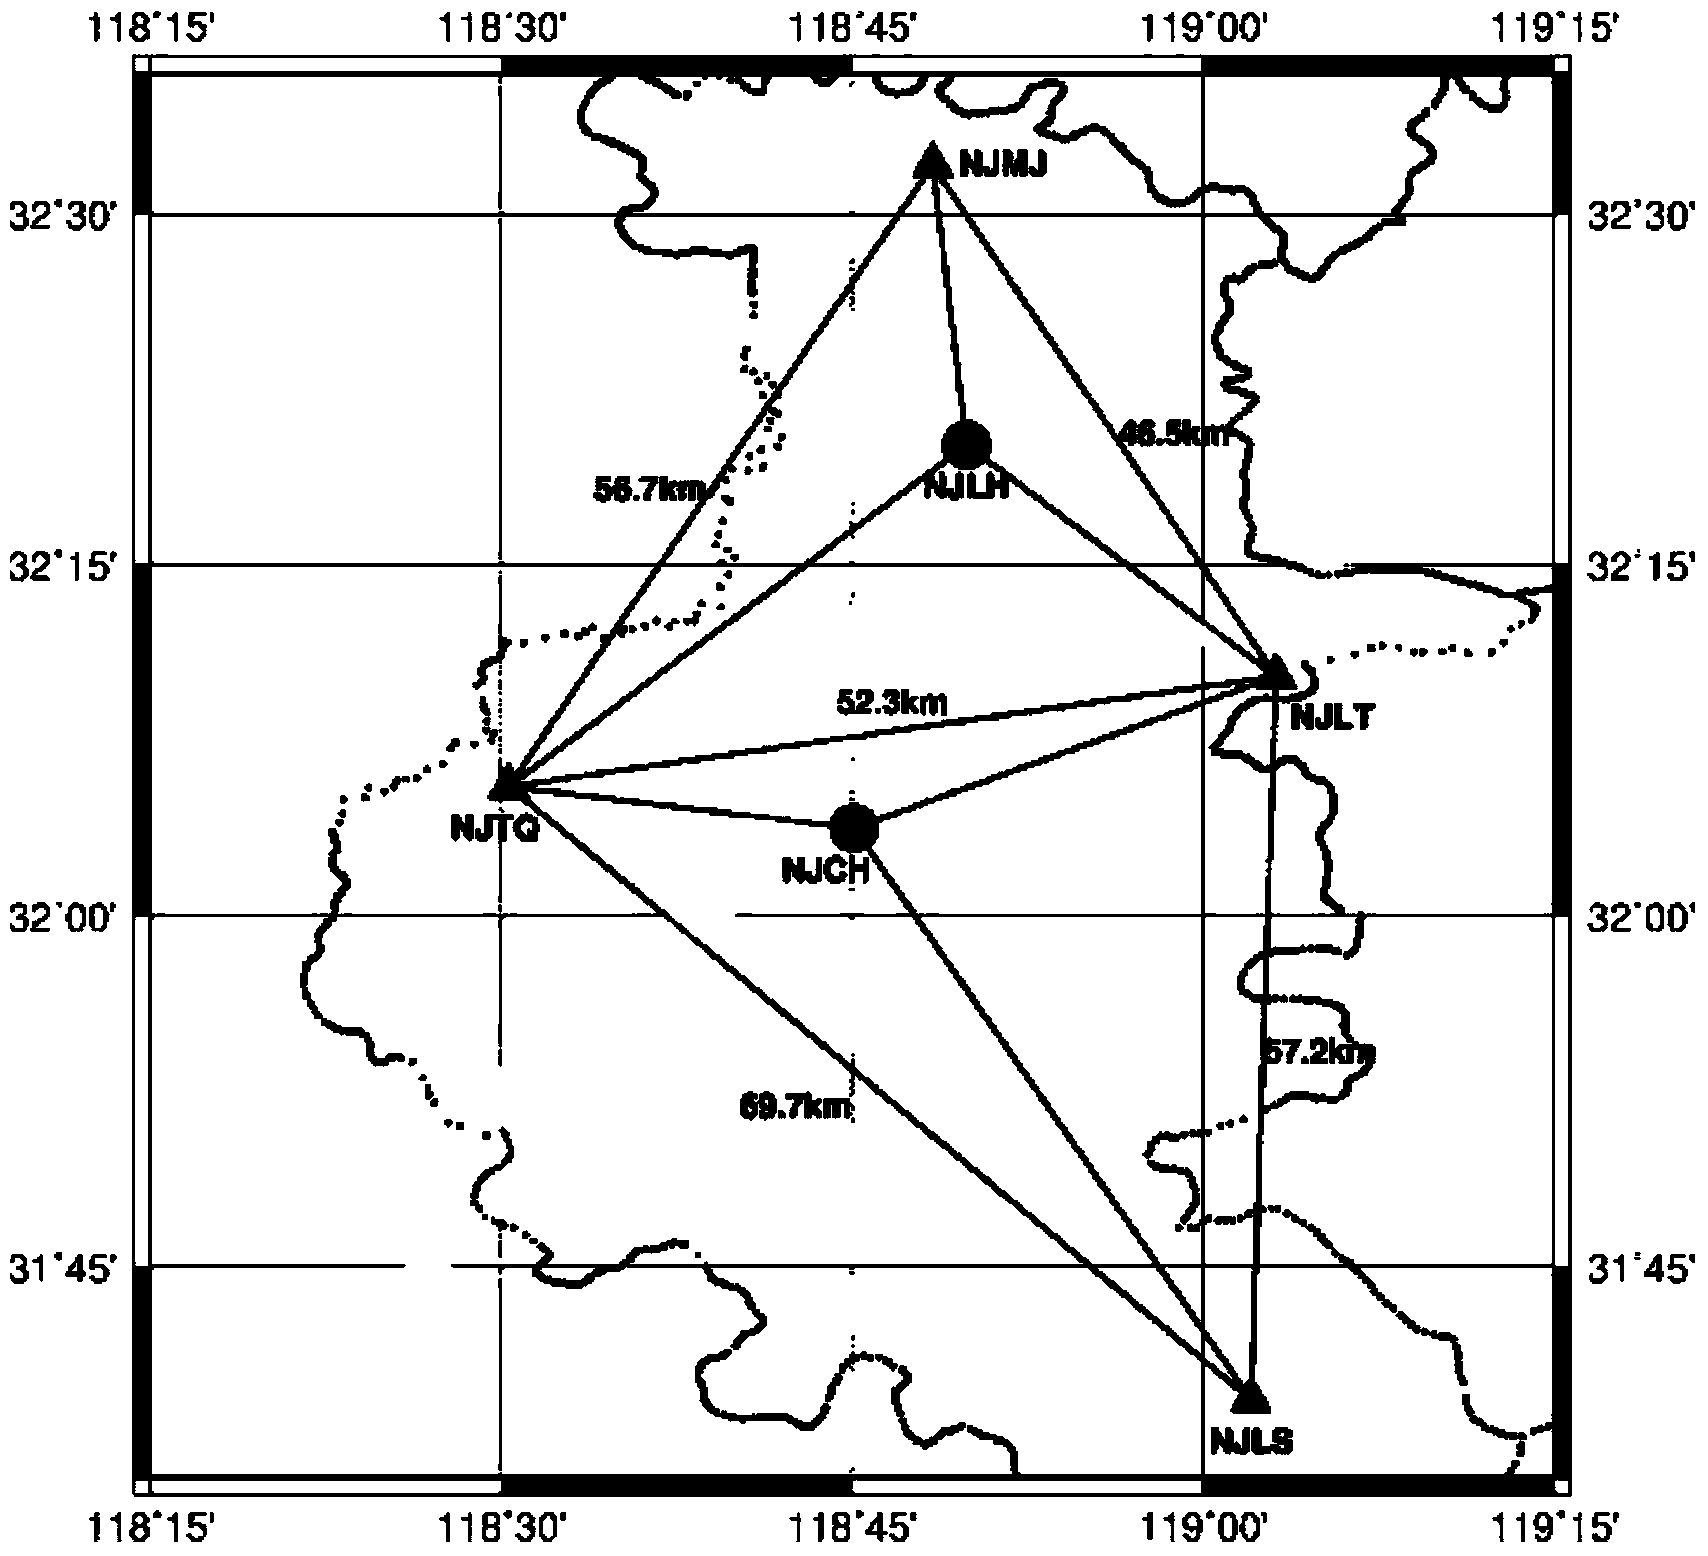 Network real time kinematic (RTK) instant locating method based on big dipper tri-band wide-lane combination